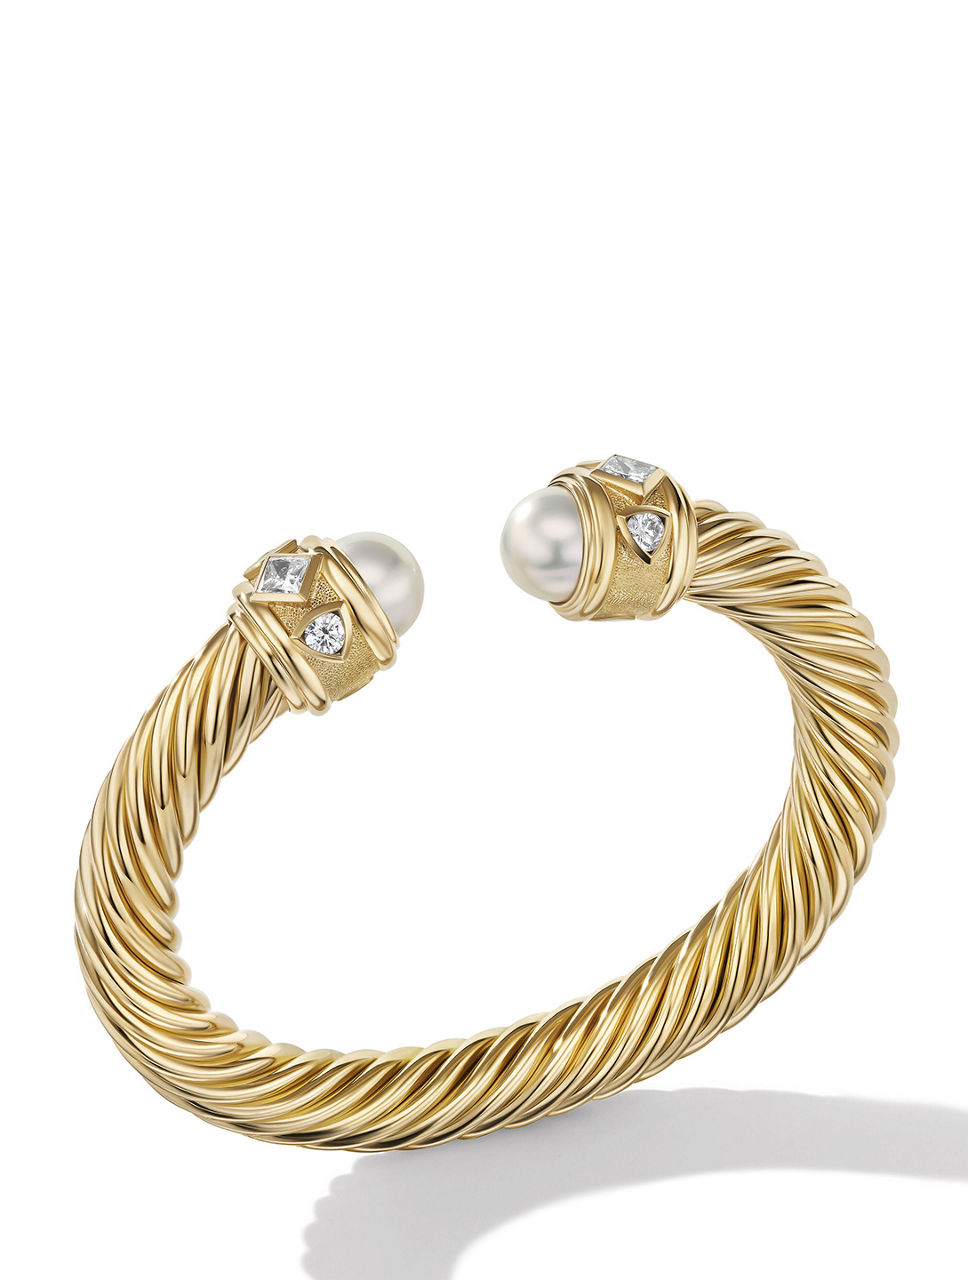 Renaissance Bracelet In 18k Yellow Gold With Pearls And Diamonds